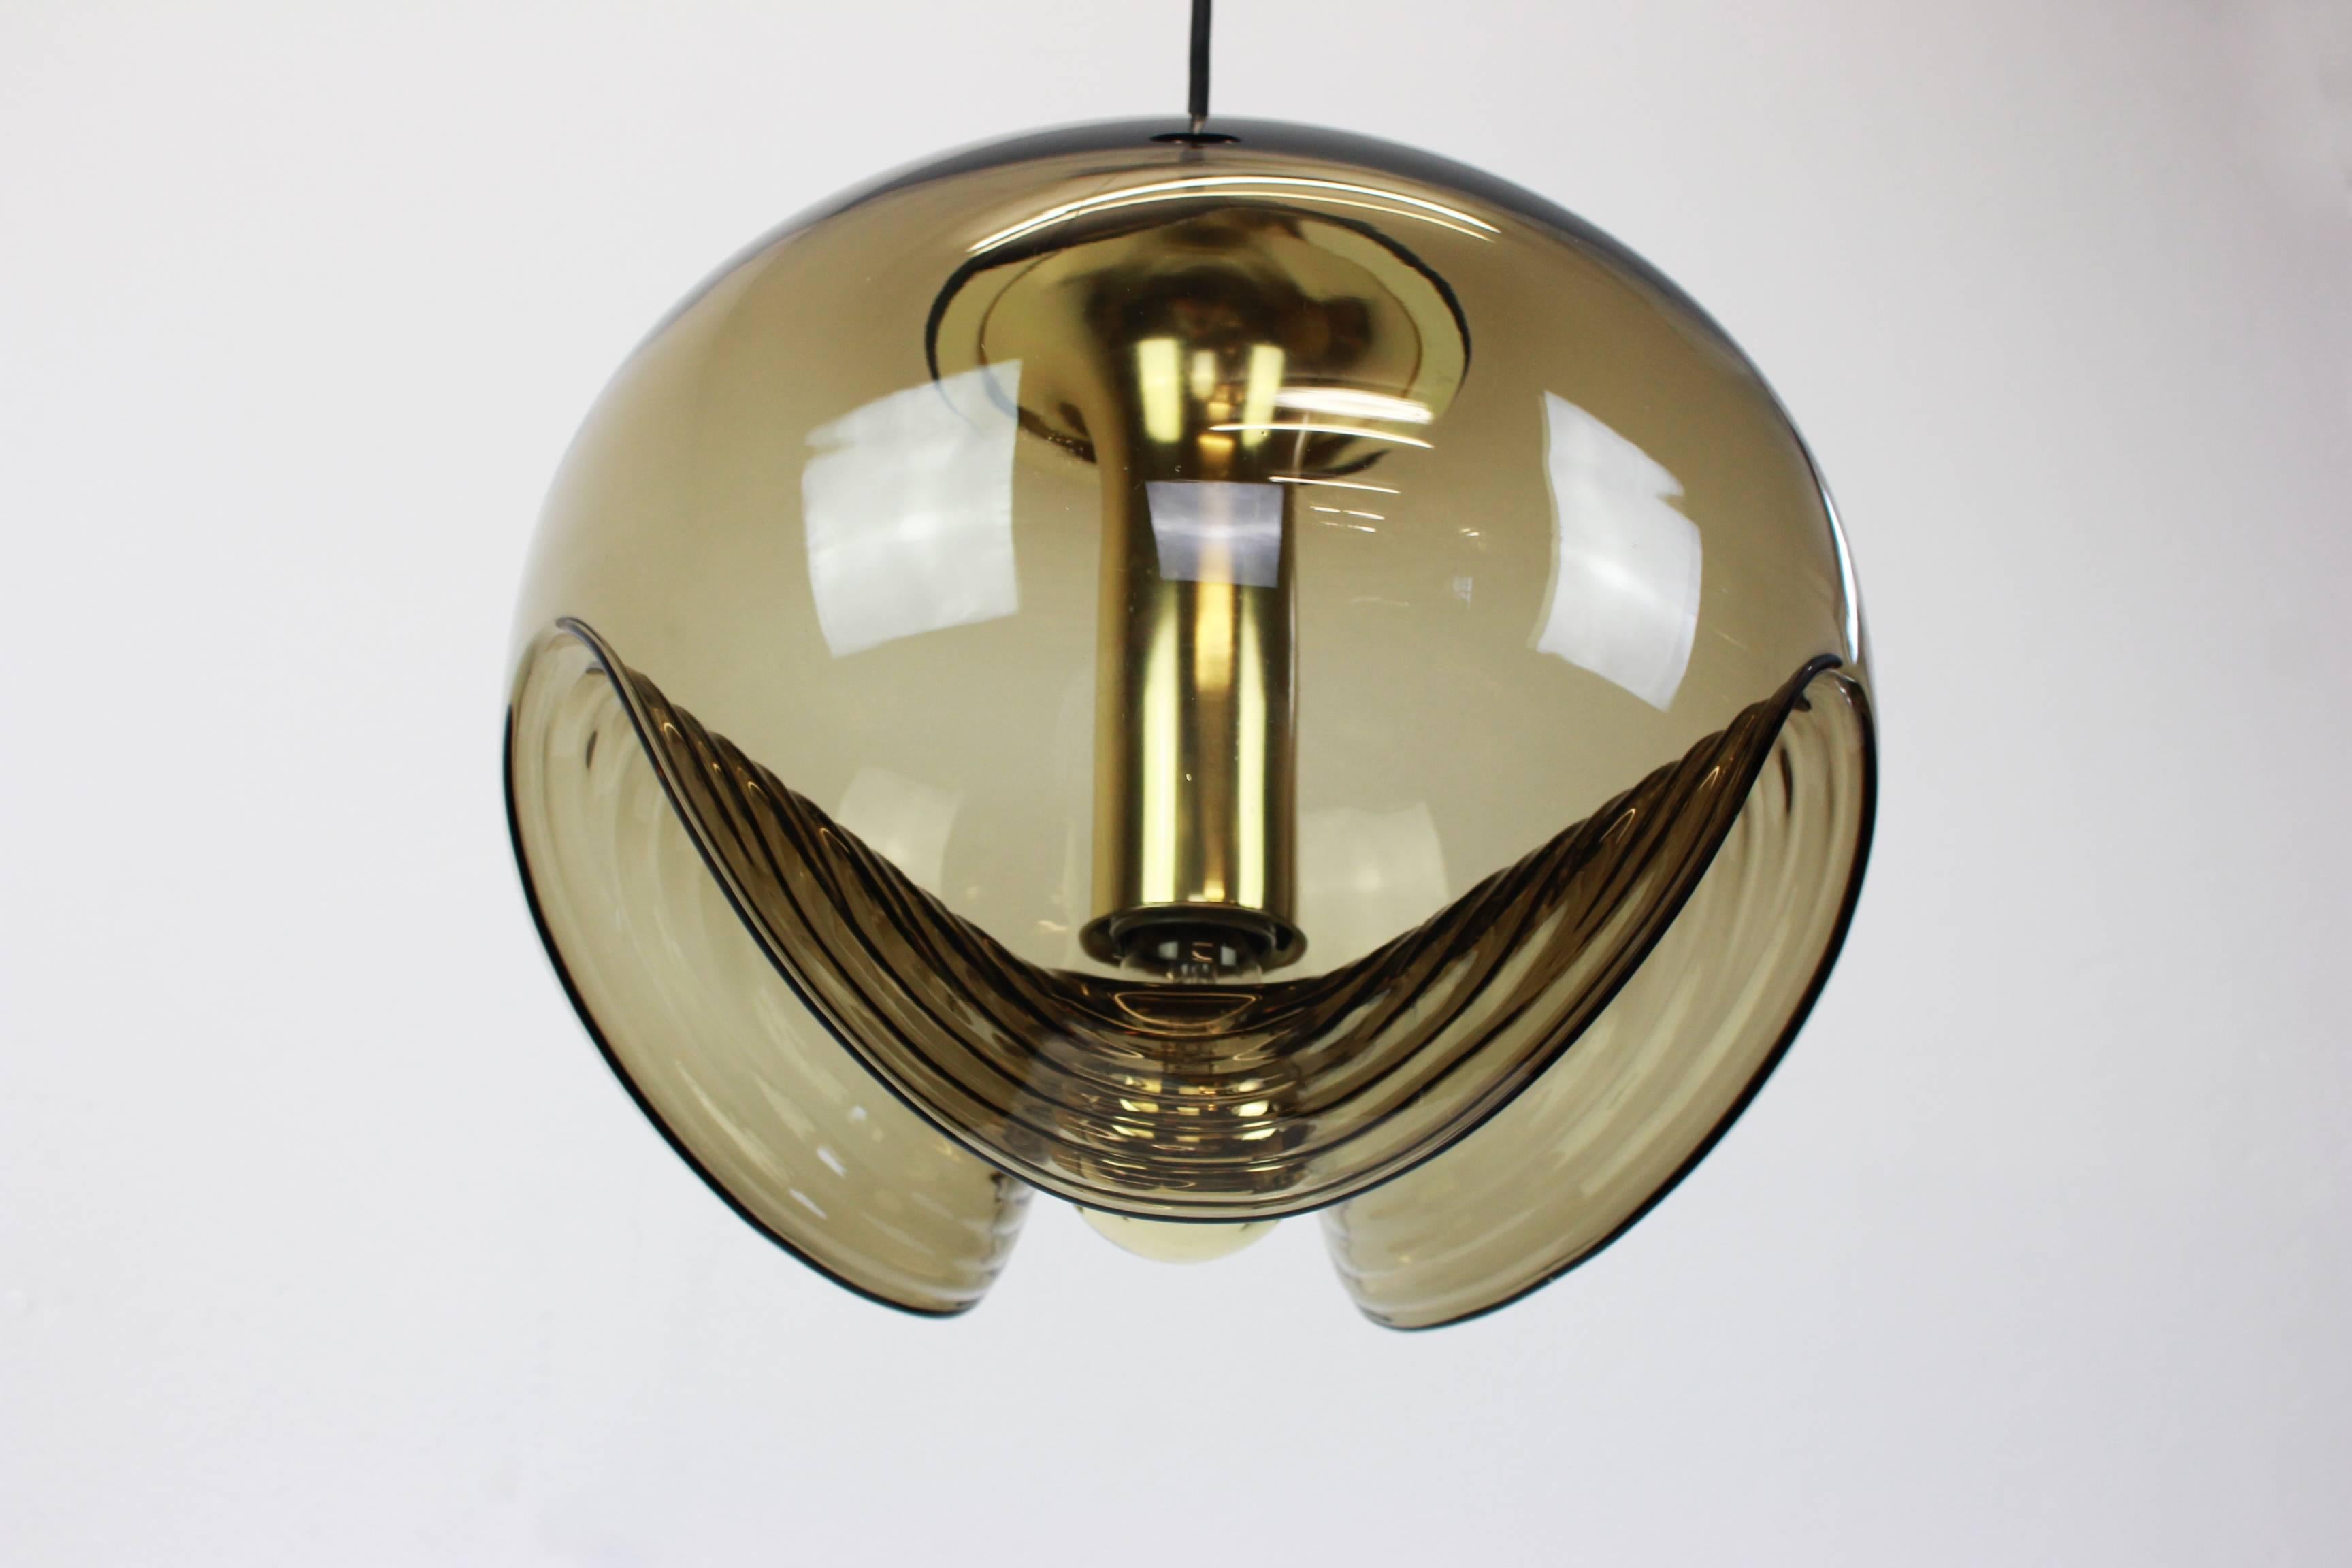 A special round biomorphic smoked glass pendant designed by Koch & Lowy for Peill & Putzler, manufactured in Germany, circa 1970s.

Sockets: 1 x E27 standard bulb. (100 W max).

Drop rod can be adjusted as required, free of charge, for greater